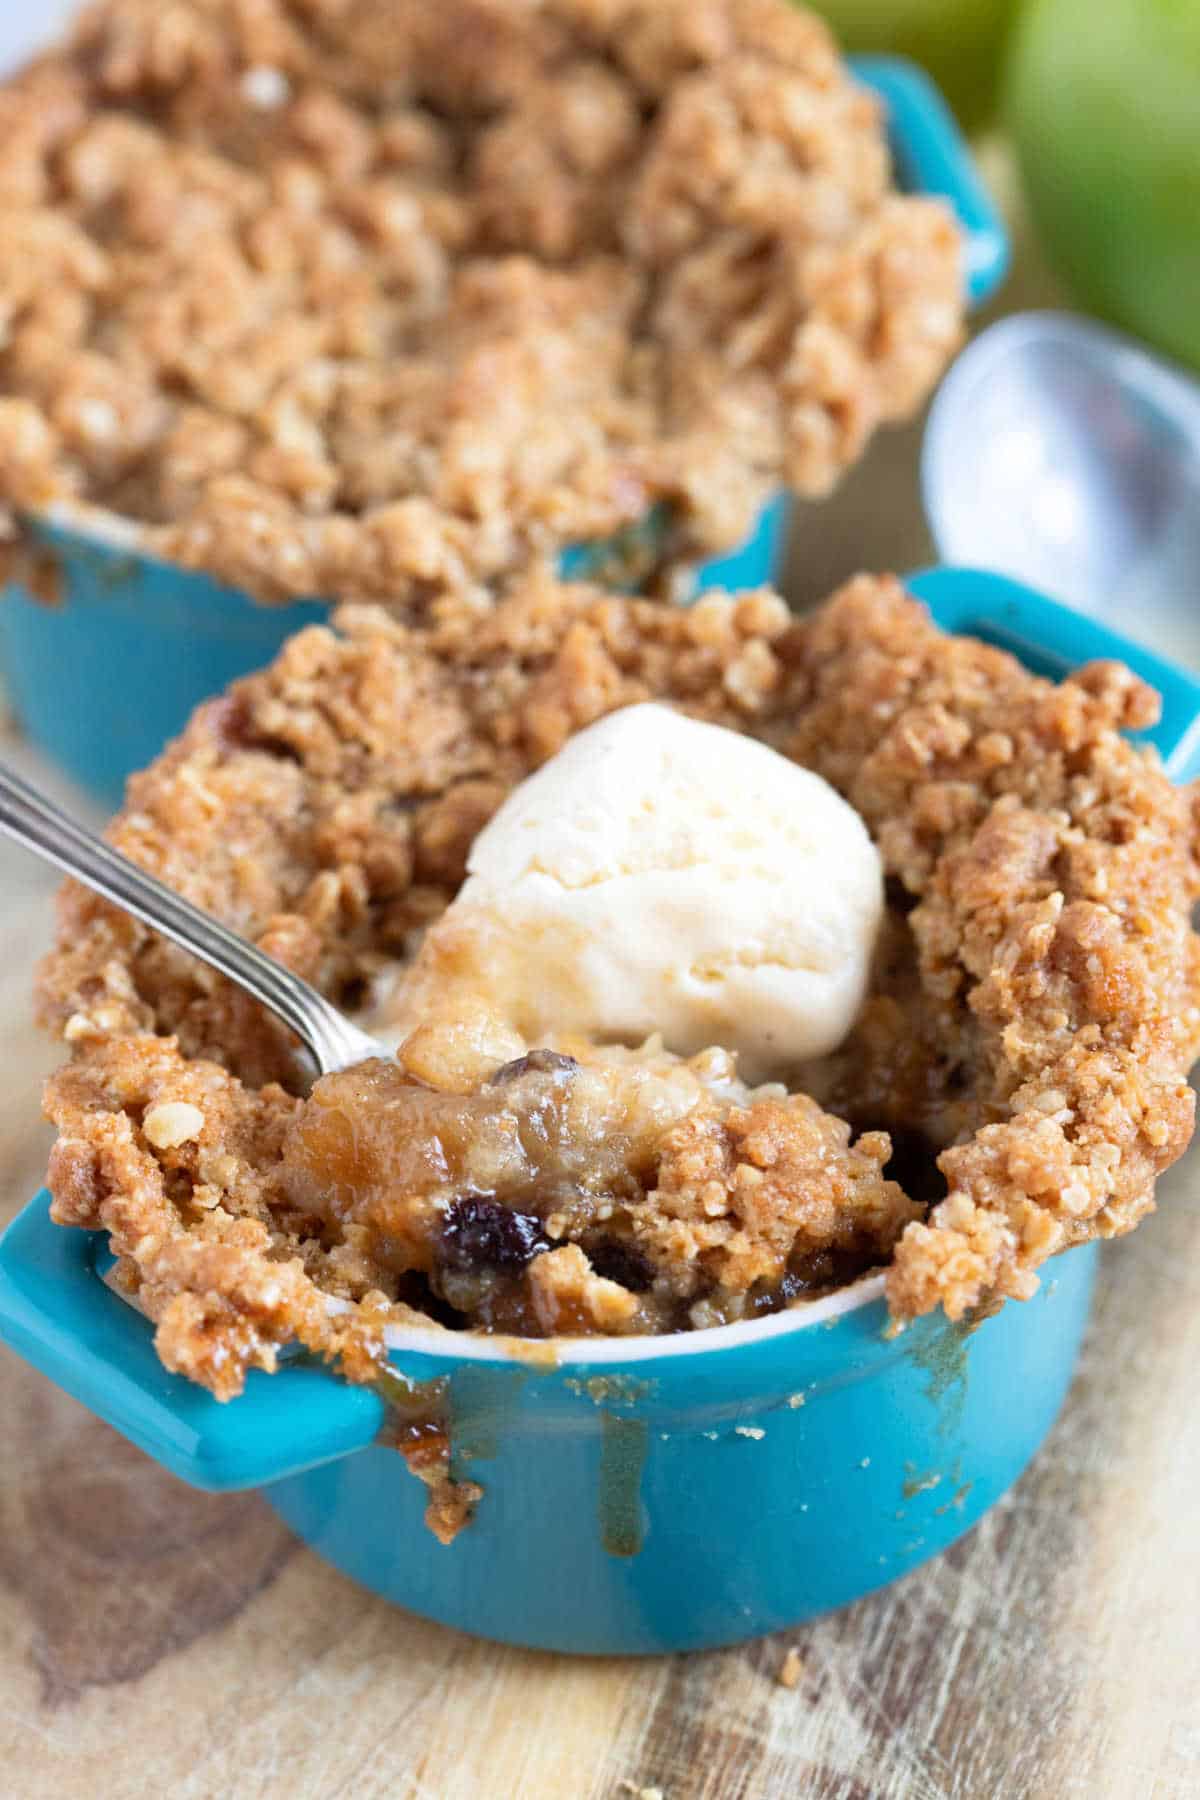 Apple and mincemeat crumble with vanilla ice cream.